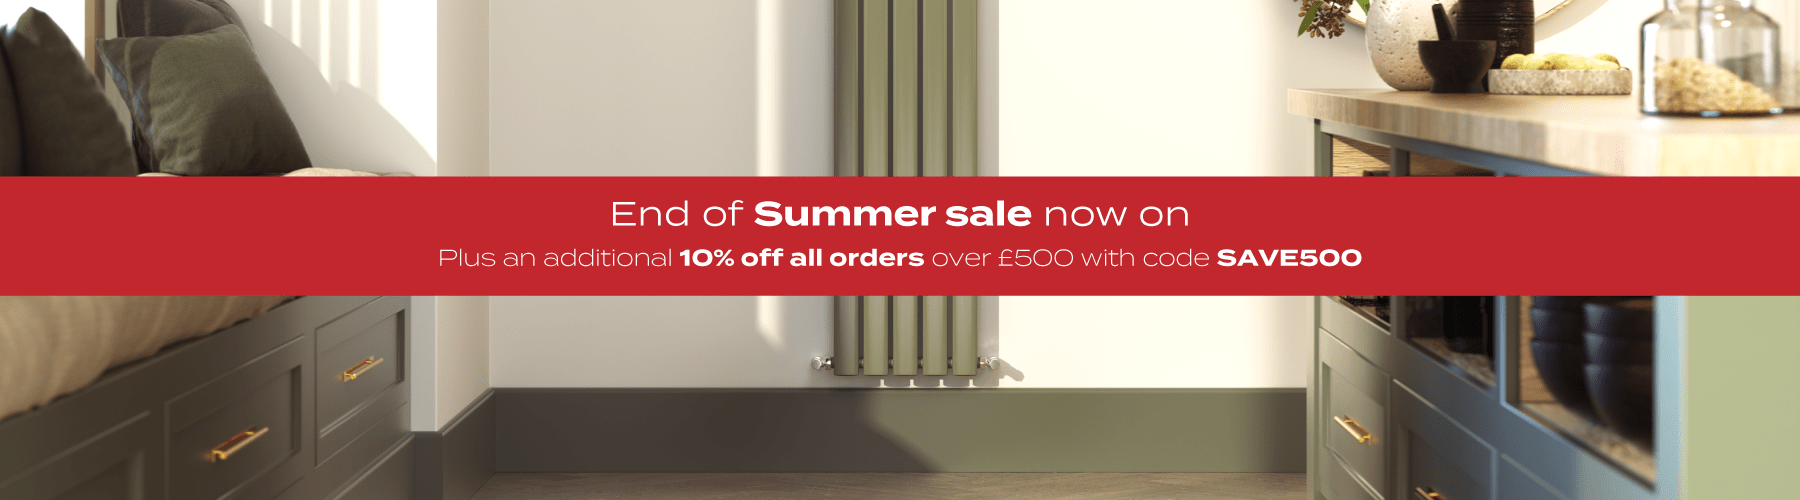  End of Summer Sale - Plus an additional 10% off all orders over £500 with code SAVE500 